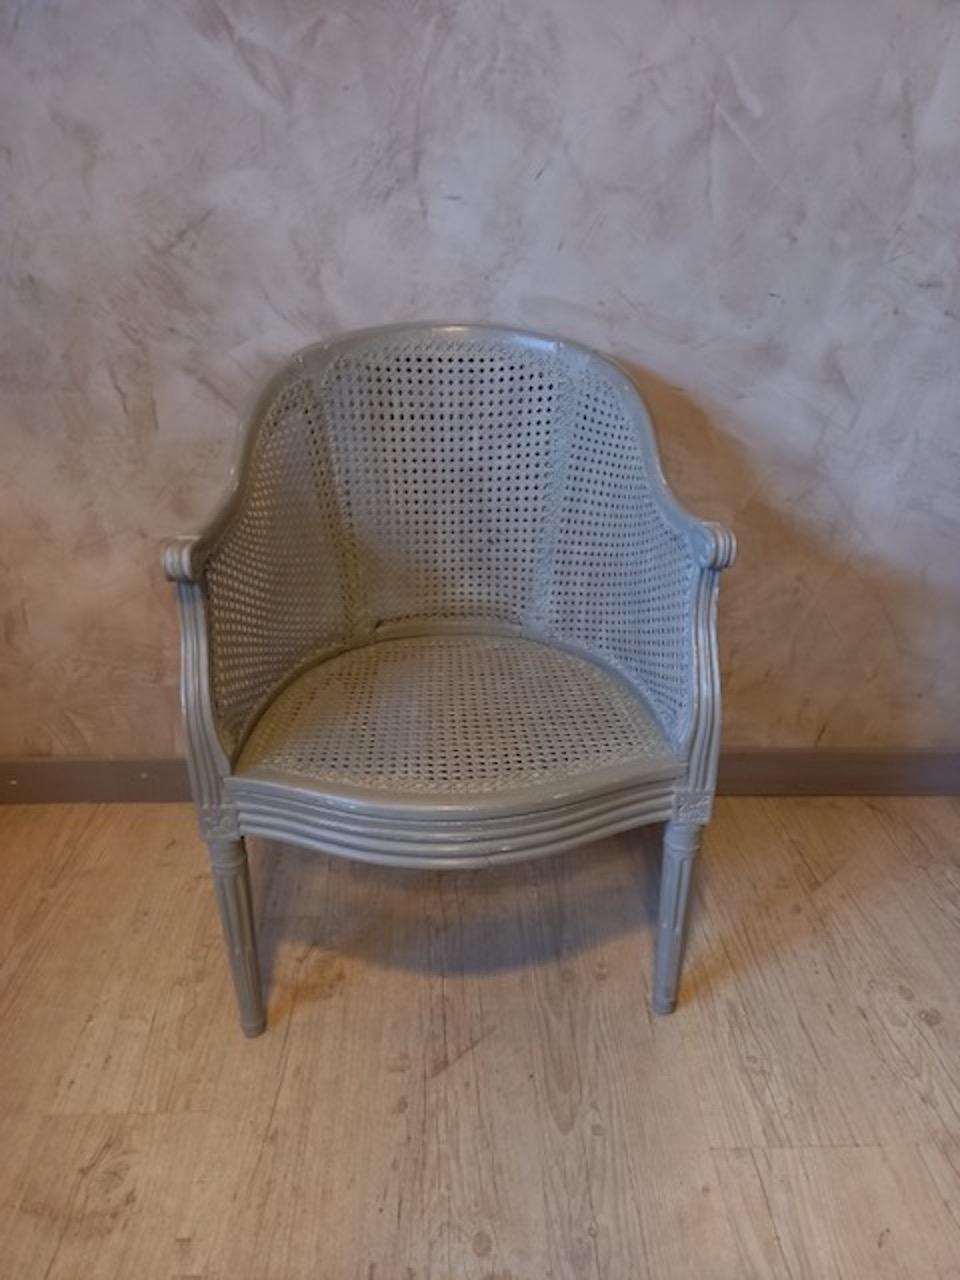 Very nice 18th century French Louis XVI cane armchair Bergere from 1870s.
Has been painted in grey. 
Nice quality.